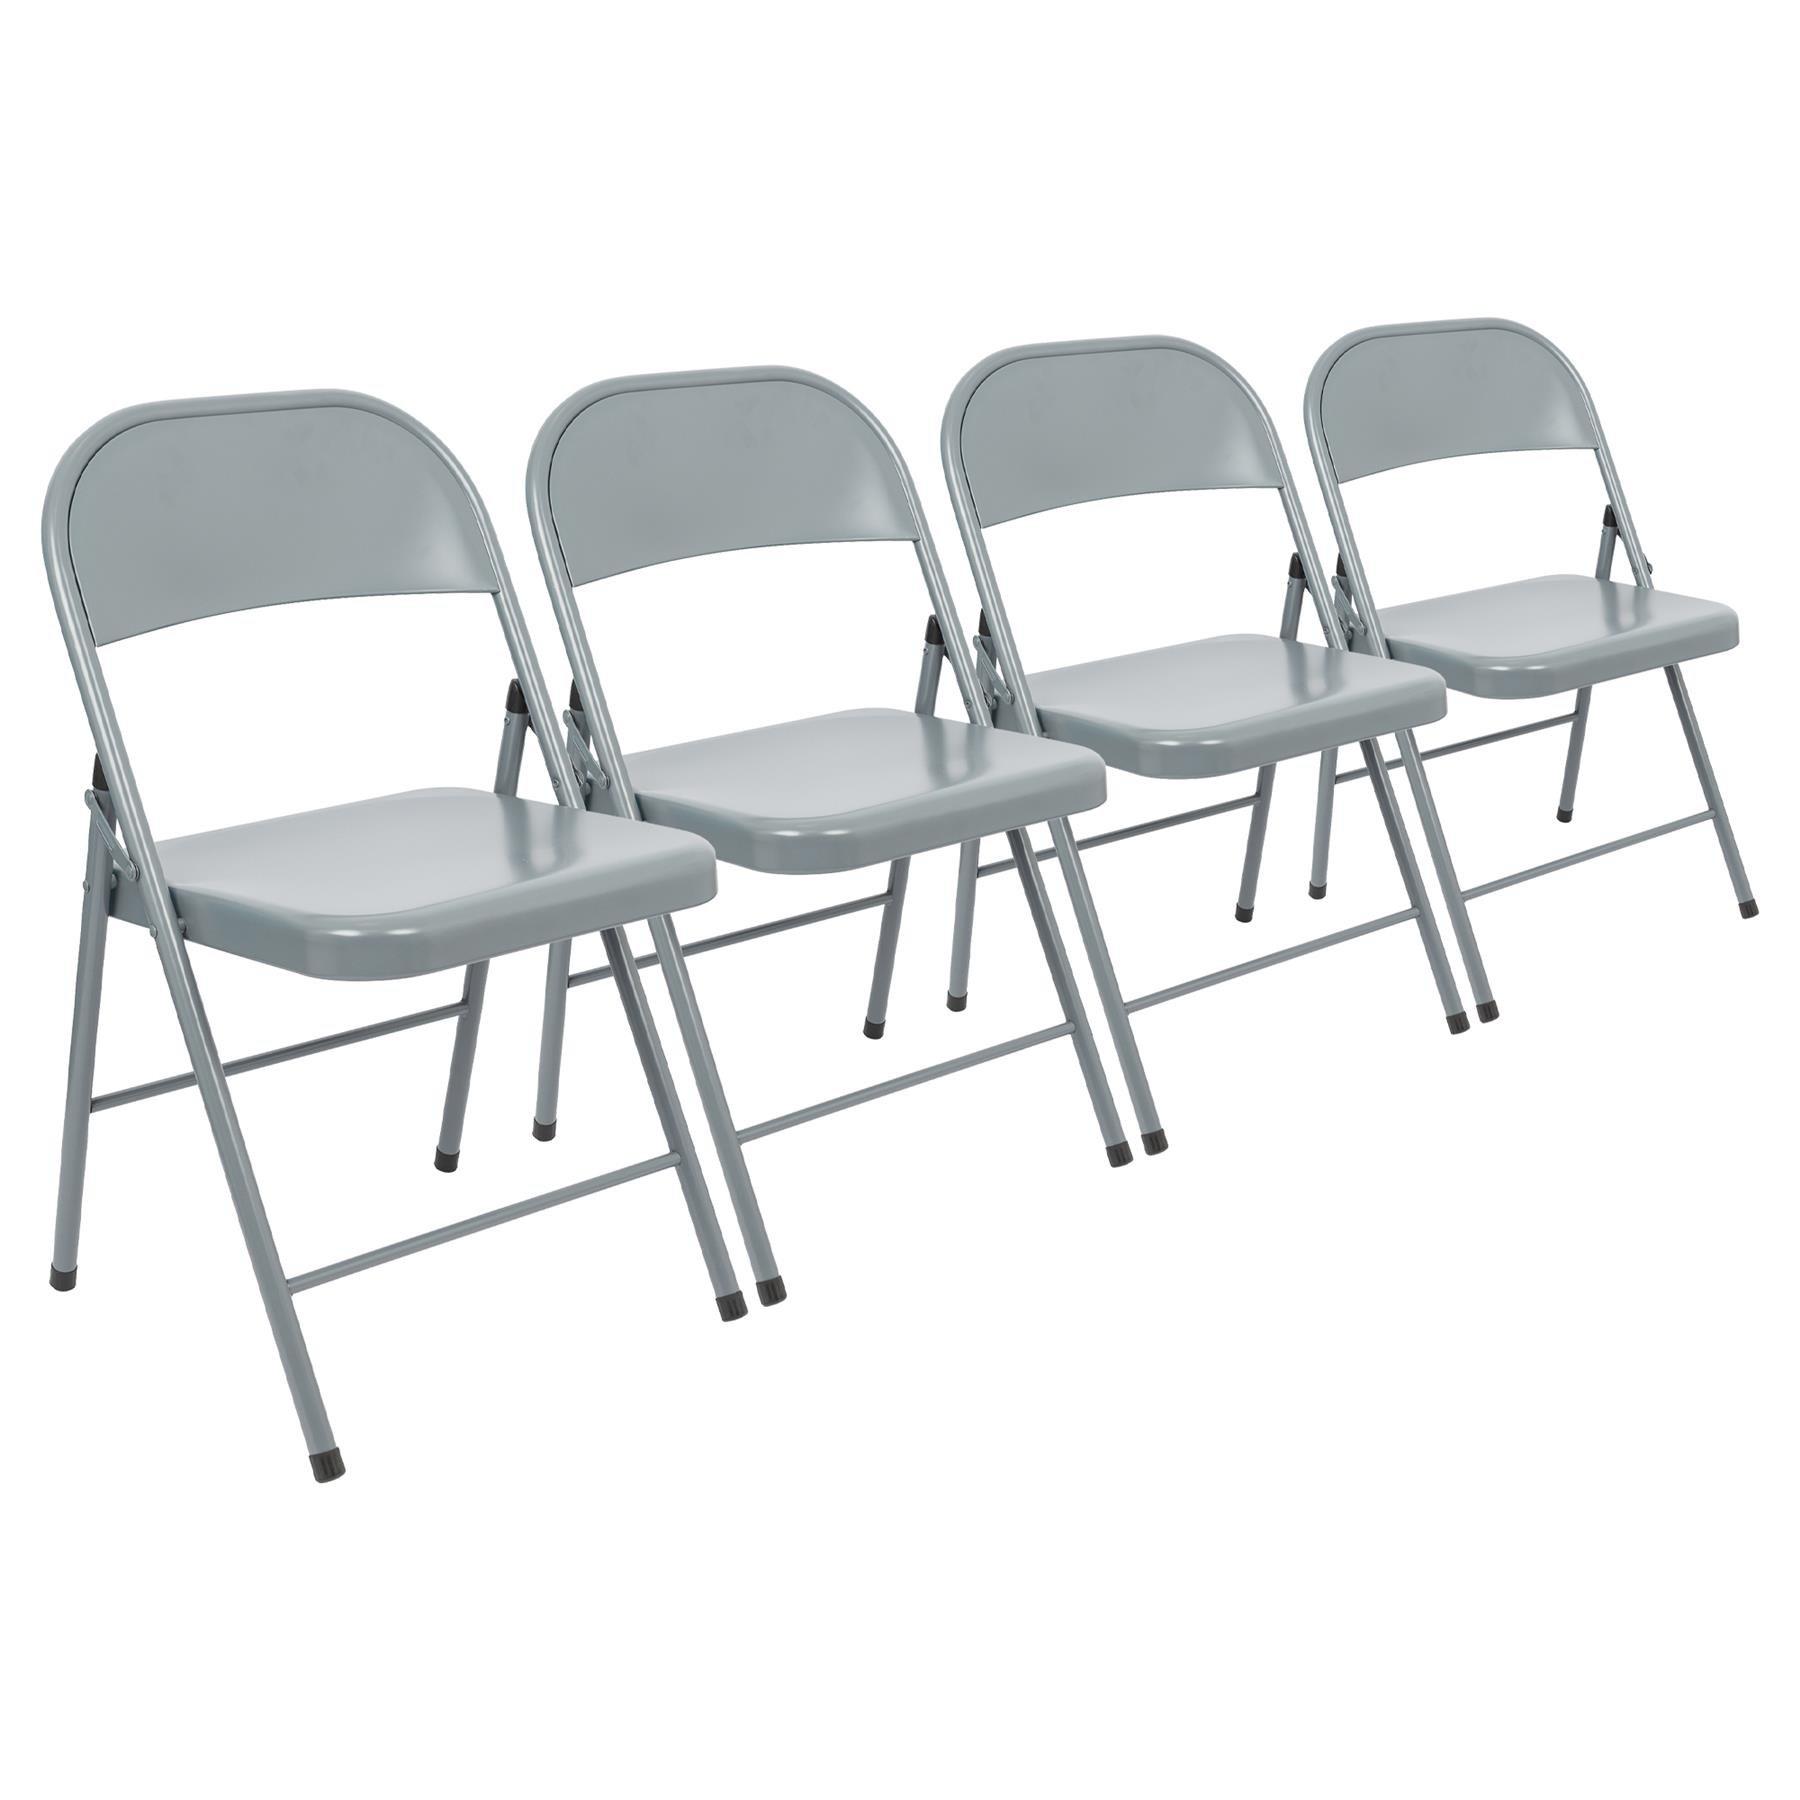 Metal Folding Chair - Pack of 4